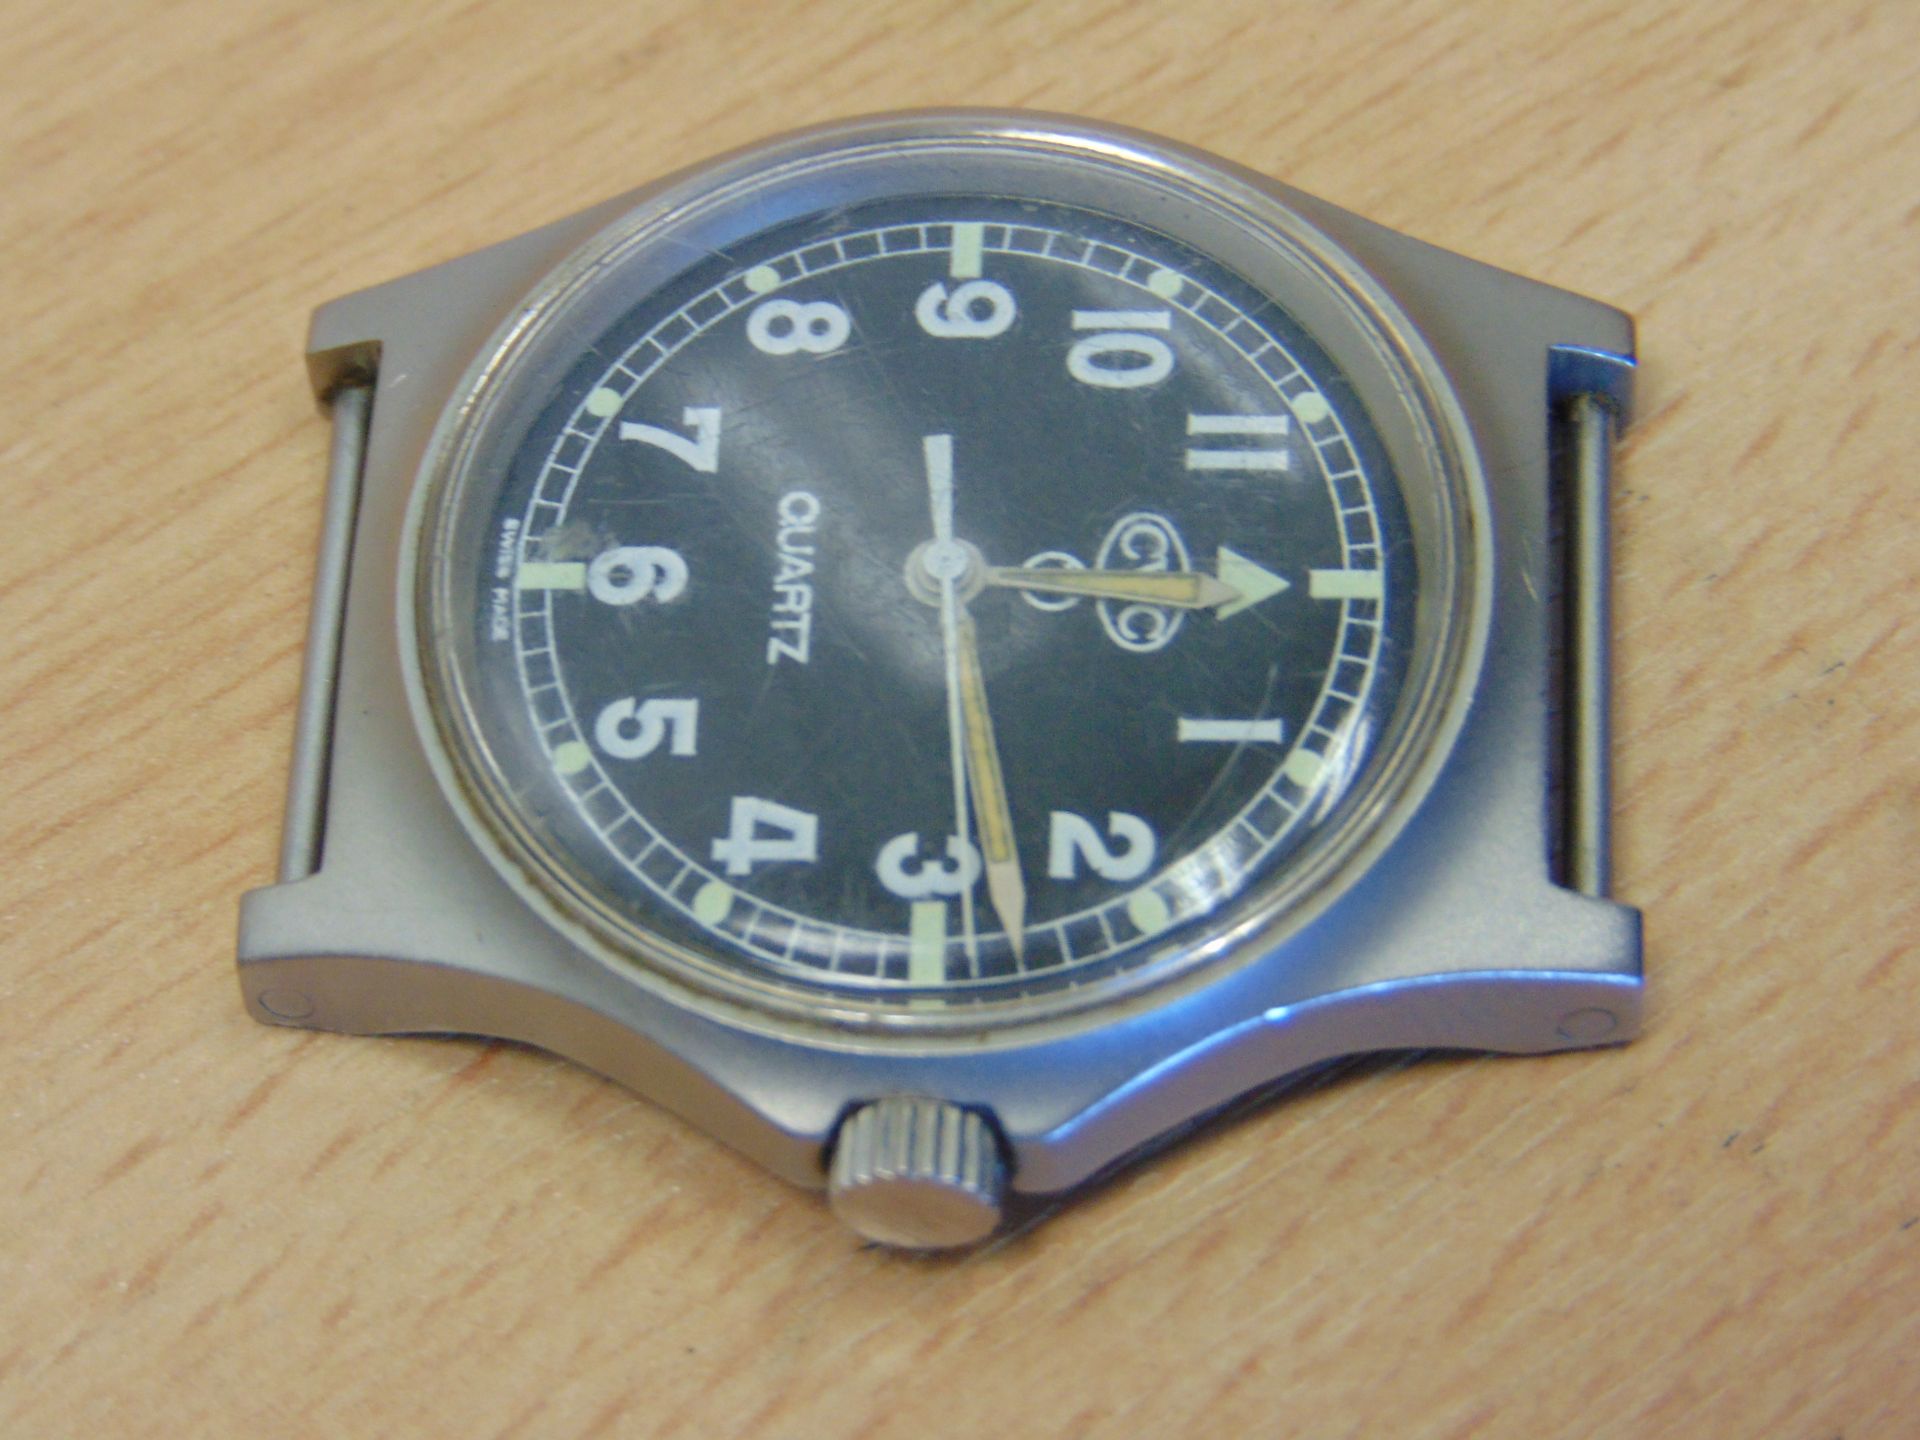 CWC QUARTZ 0552 ROYAL MARINES/ ROYAL NAVY ISSUE SERVICE WATCH NATO MARKED- 1989 - Image 2 of 7